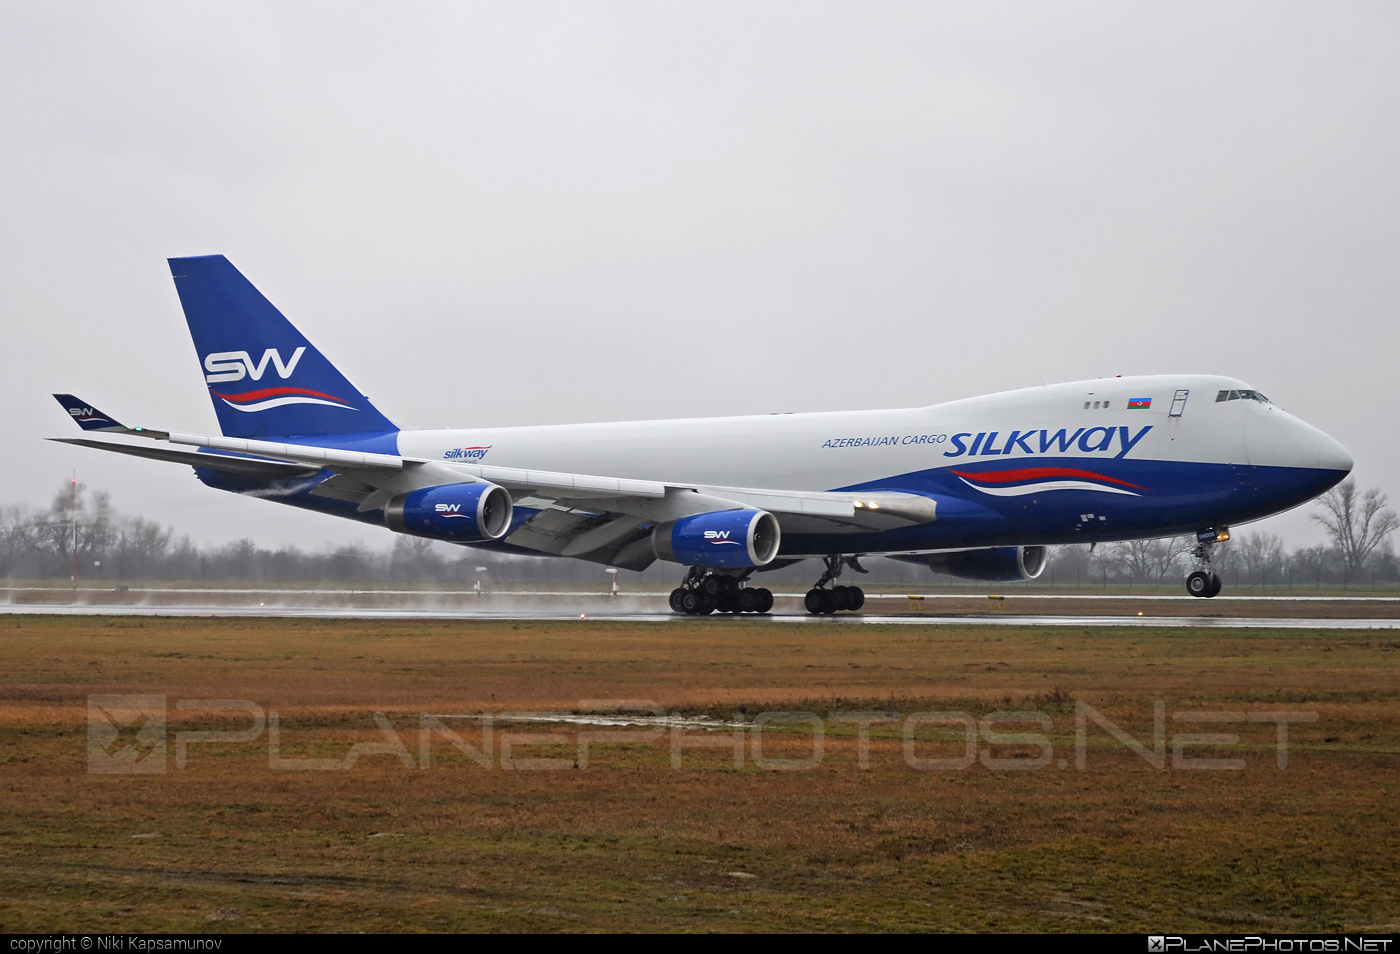 Boeing 747-400F - 4K-SW008 operated by Silk Way West Airlines #b747 #boeing #boeing747 #jumbo #silkwayairlines #silkwaywestairlines